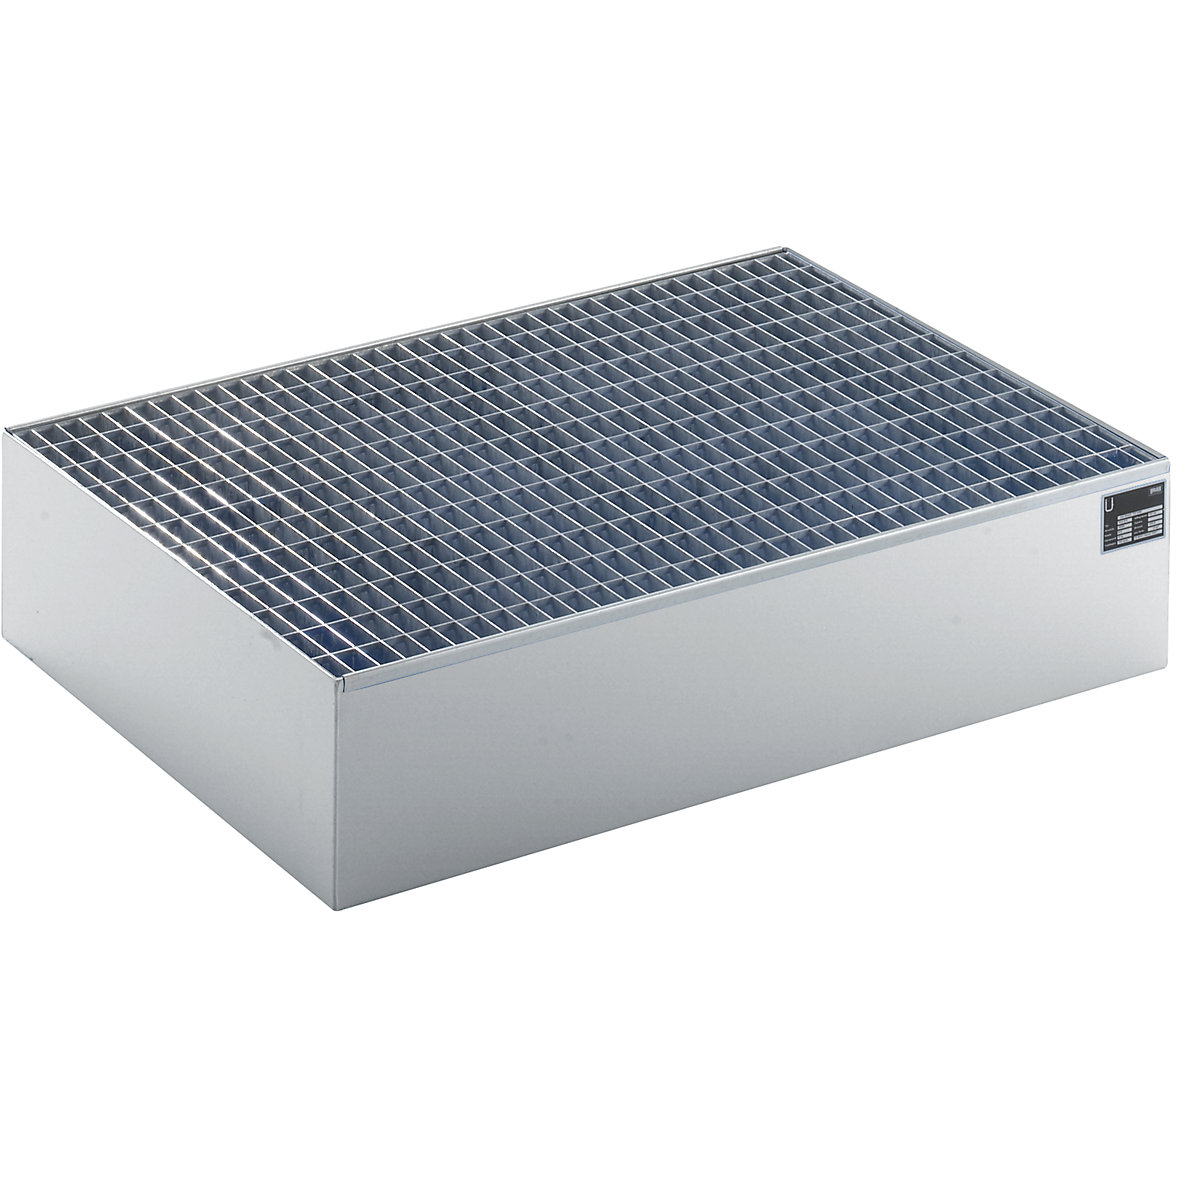 EUROKRAFTbasic – Pallet sump tray, LxWxH 1200 x 800 x 260 mm, hot dip galvanised, with grate